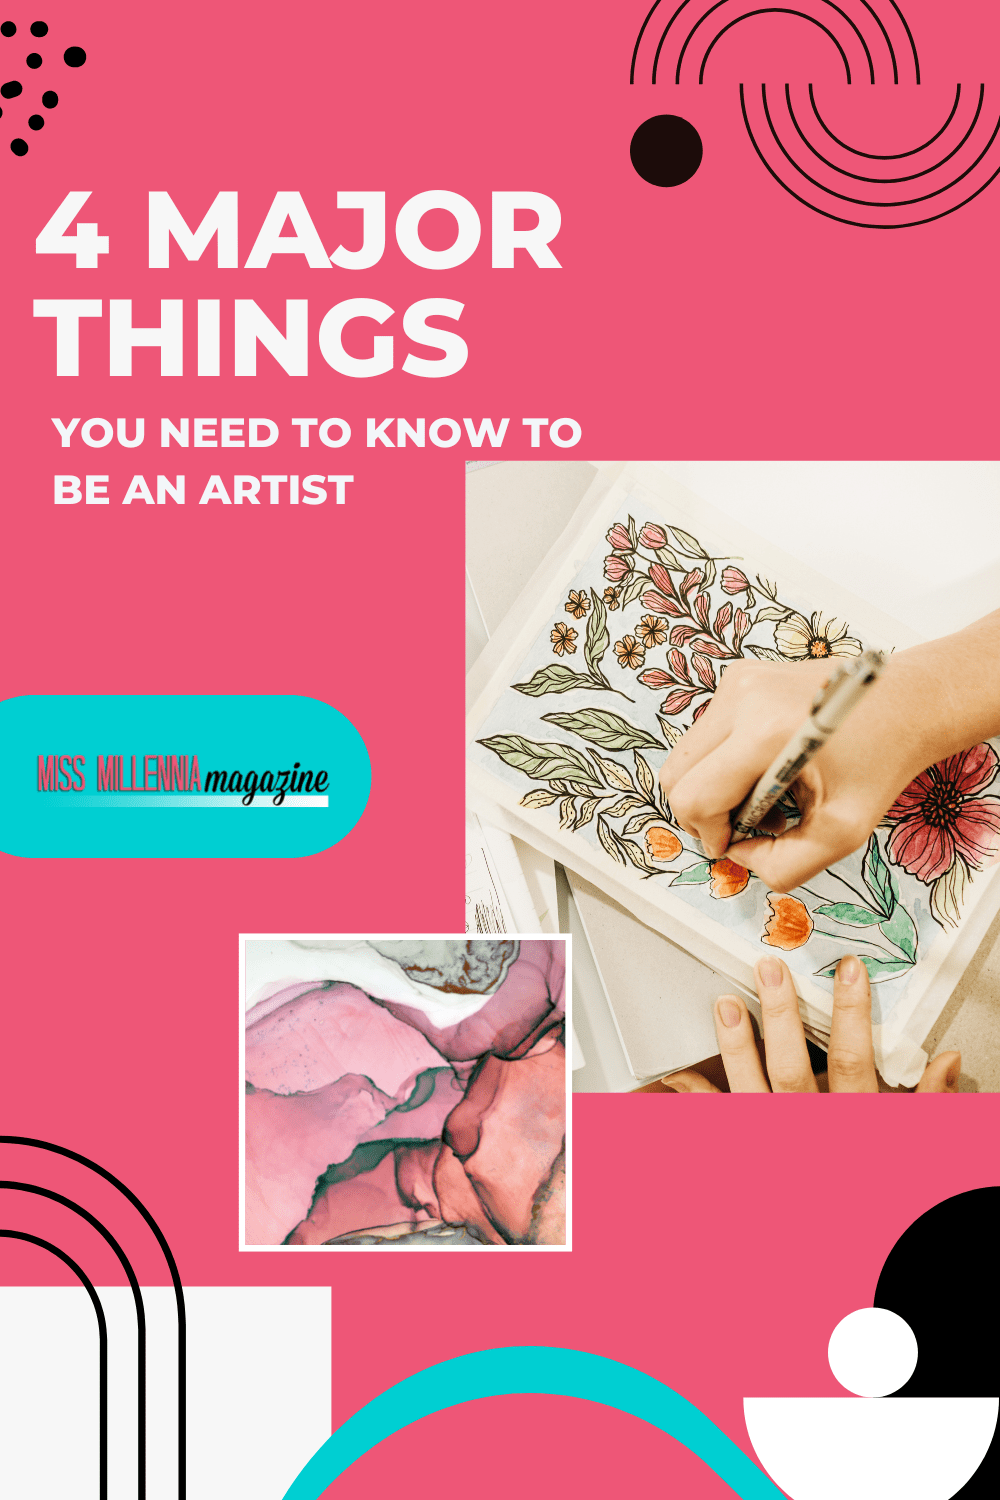 4 Major Things You Need to Know to be an Artist